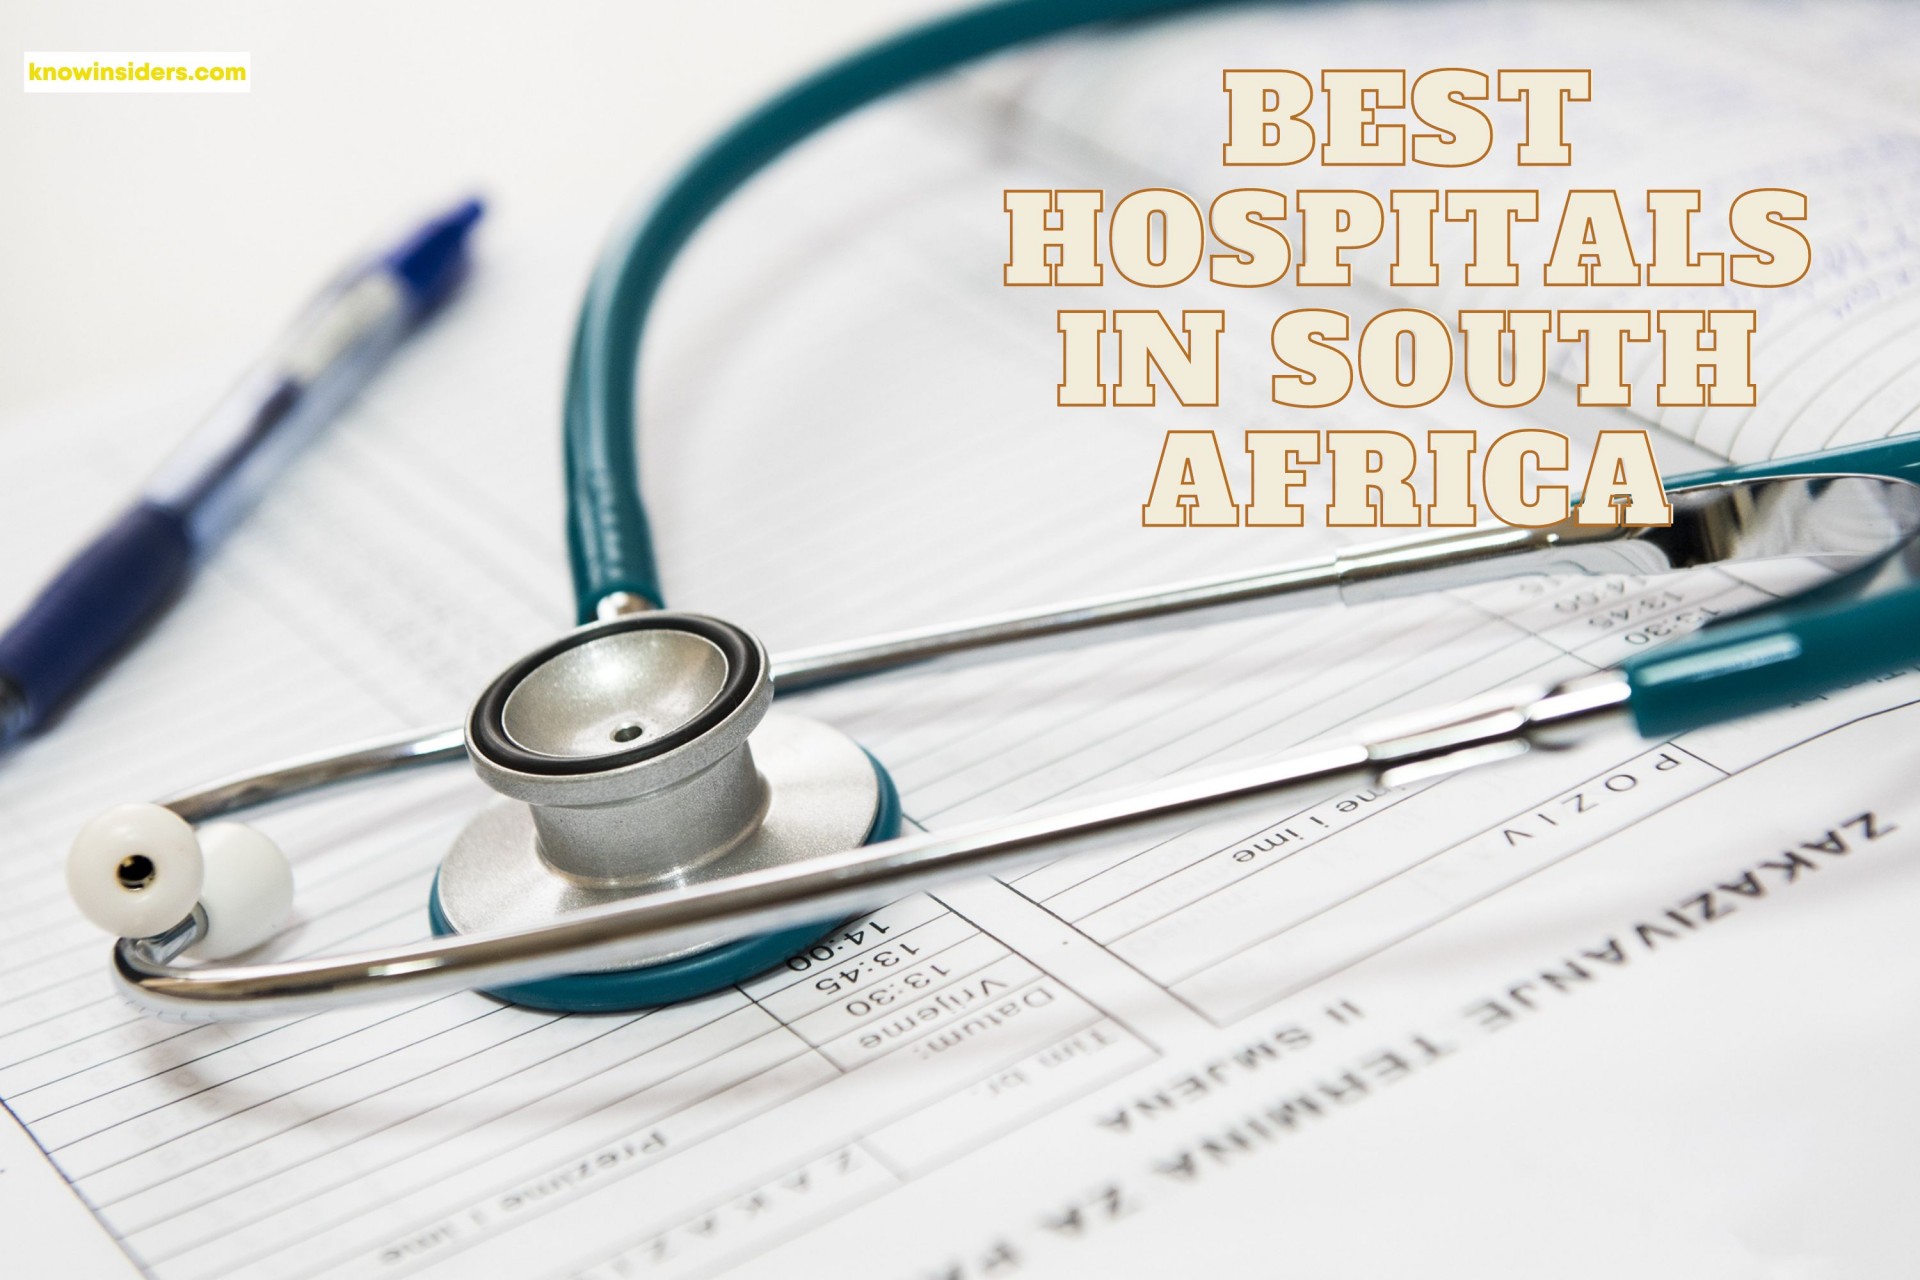 Top 10 Best Hospitals In South Africa For Both Citizens and Visitors